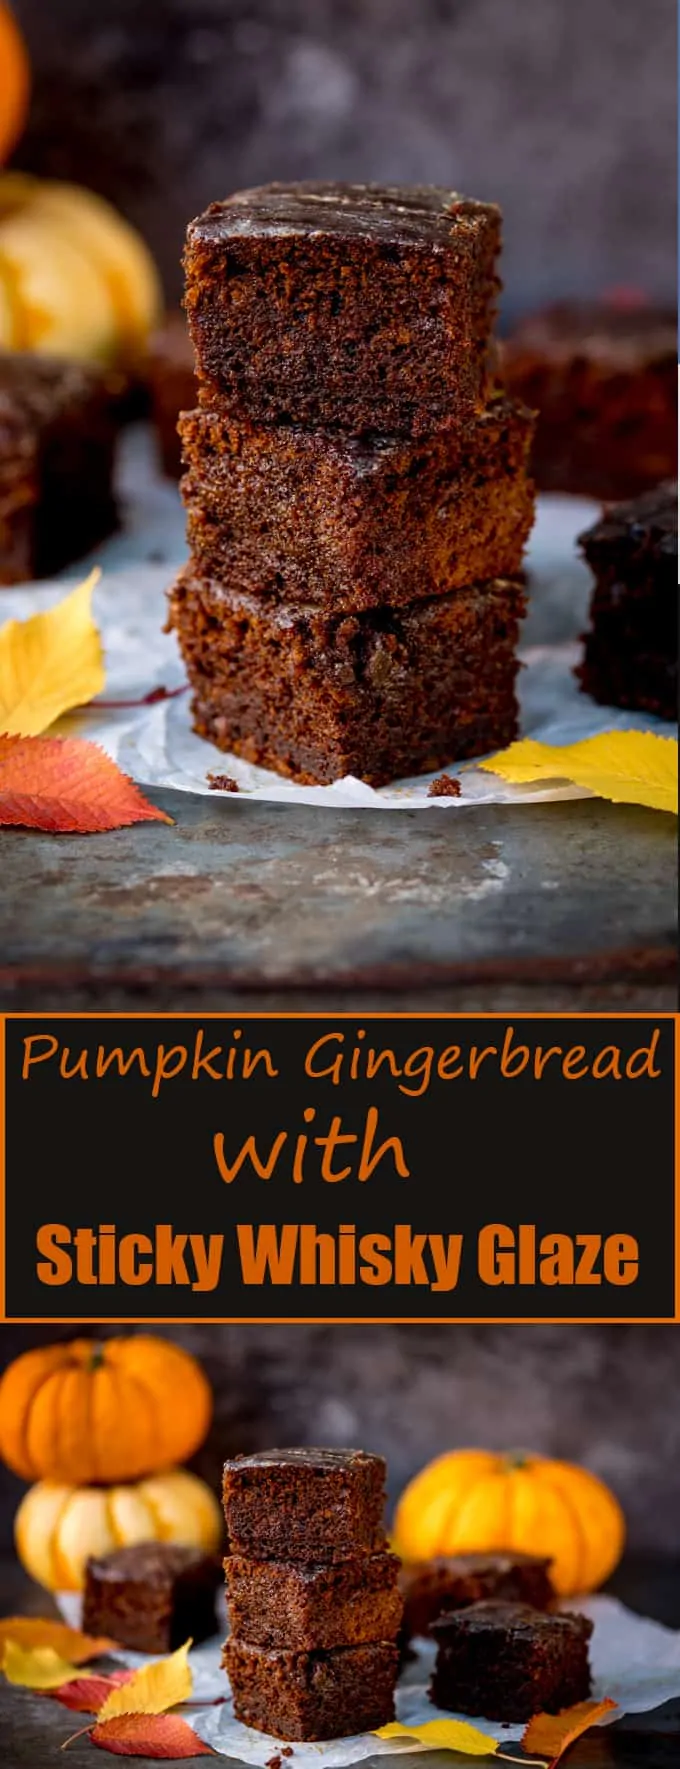 Pumpkin Gingerbread Cake with Sticky Whisky Glaze – this is bonfire night all wrapped up in one bite! Eat cold or serve warm with custard.